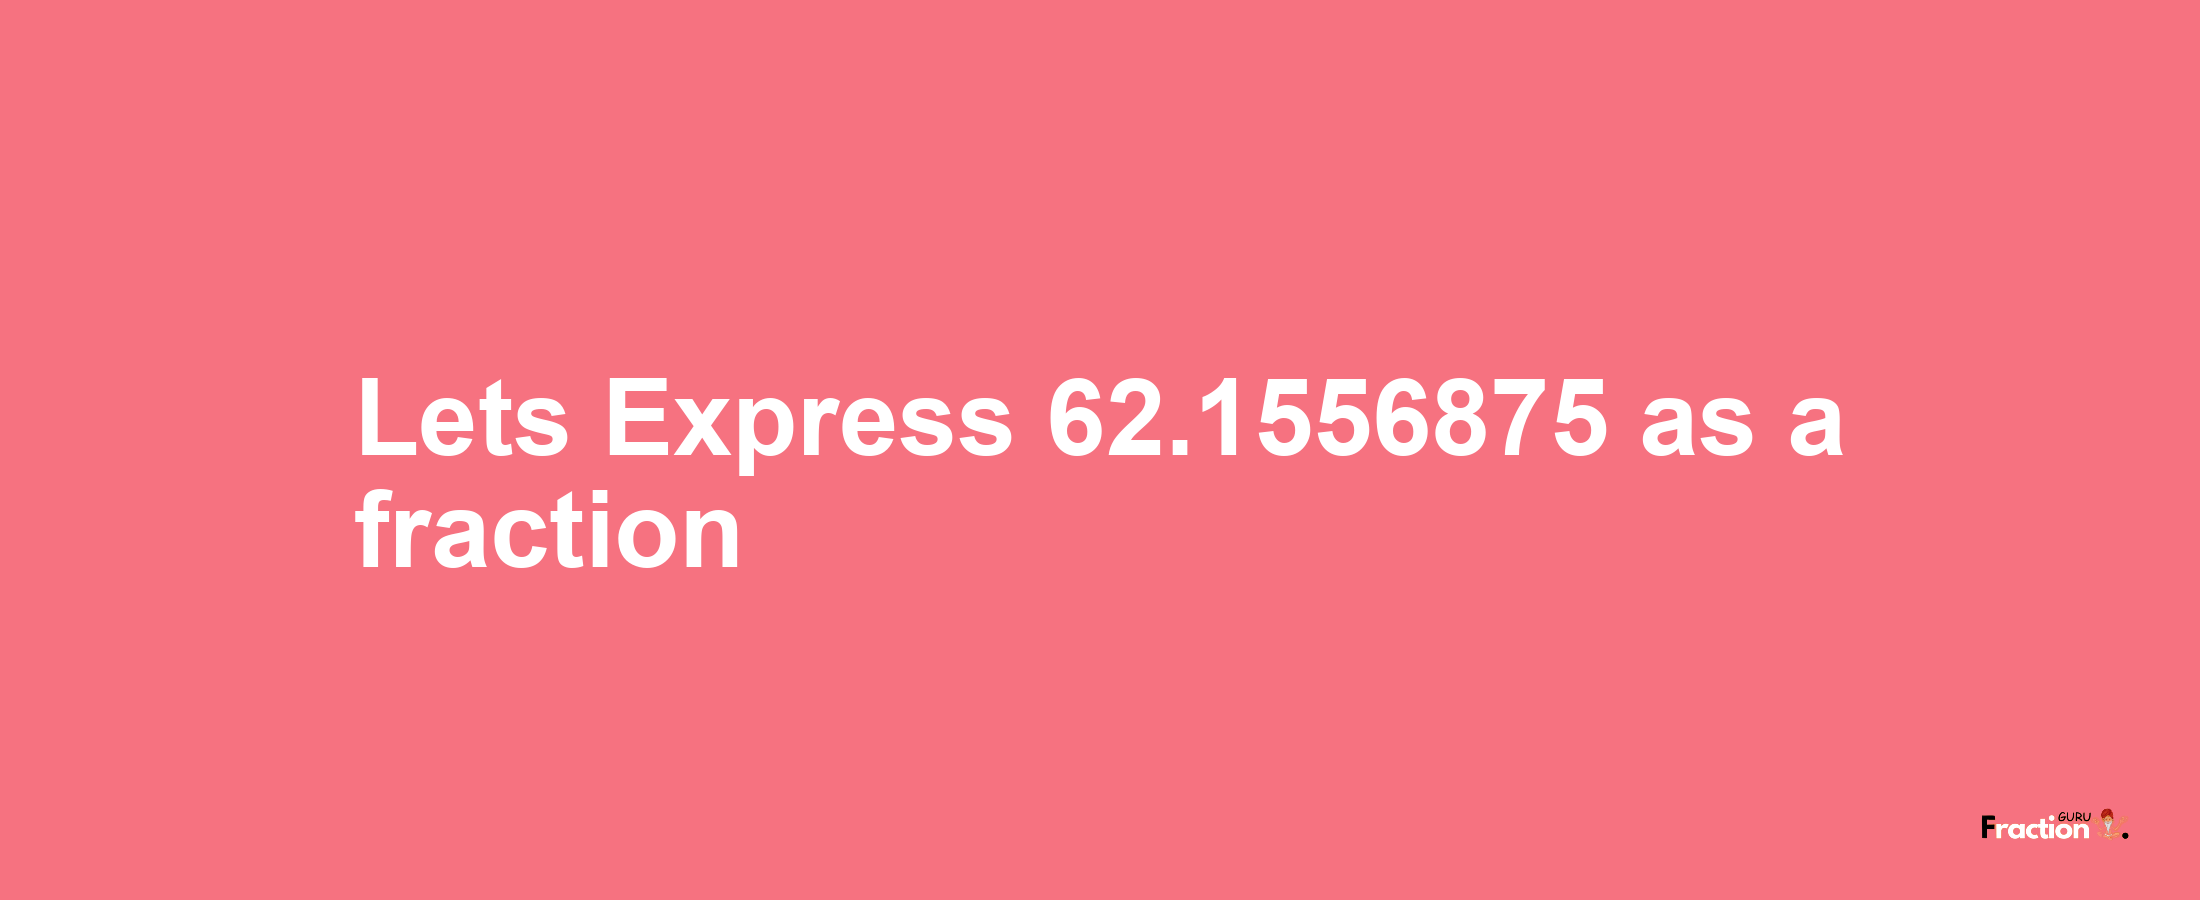 Lets Express 62.1556875 as afraction